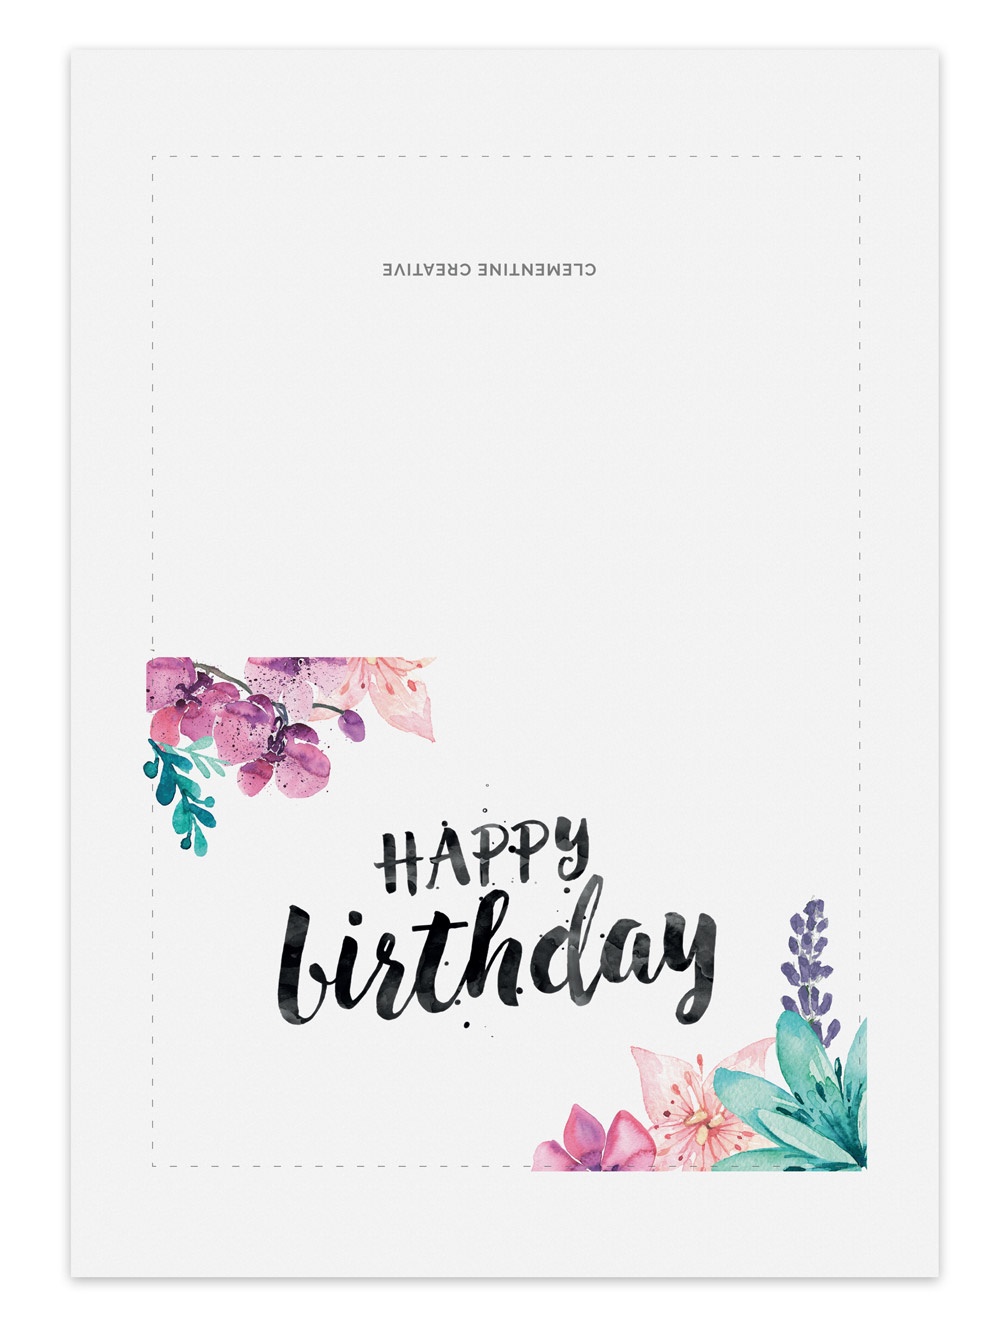 Happy Birthday Cards To Print Free — Birthday Invitation Examples - Free Printable Birthday Cards For Her